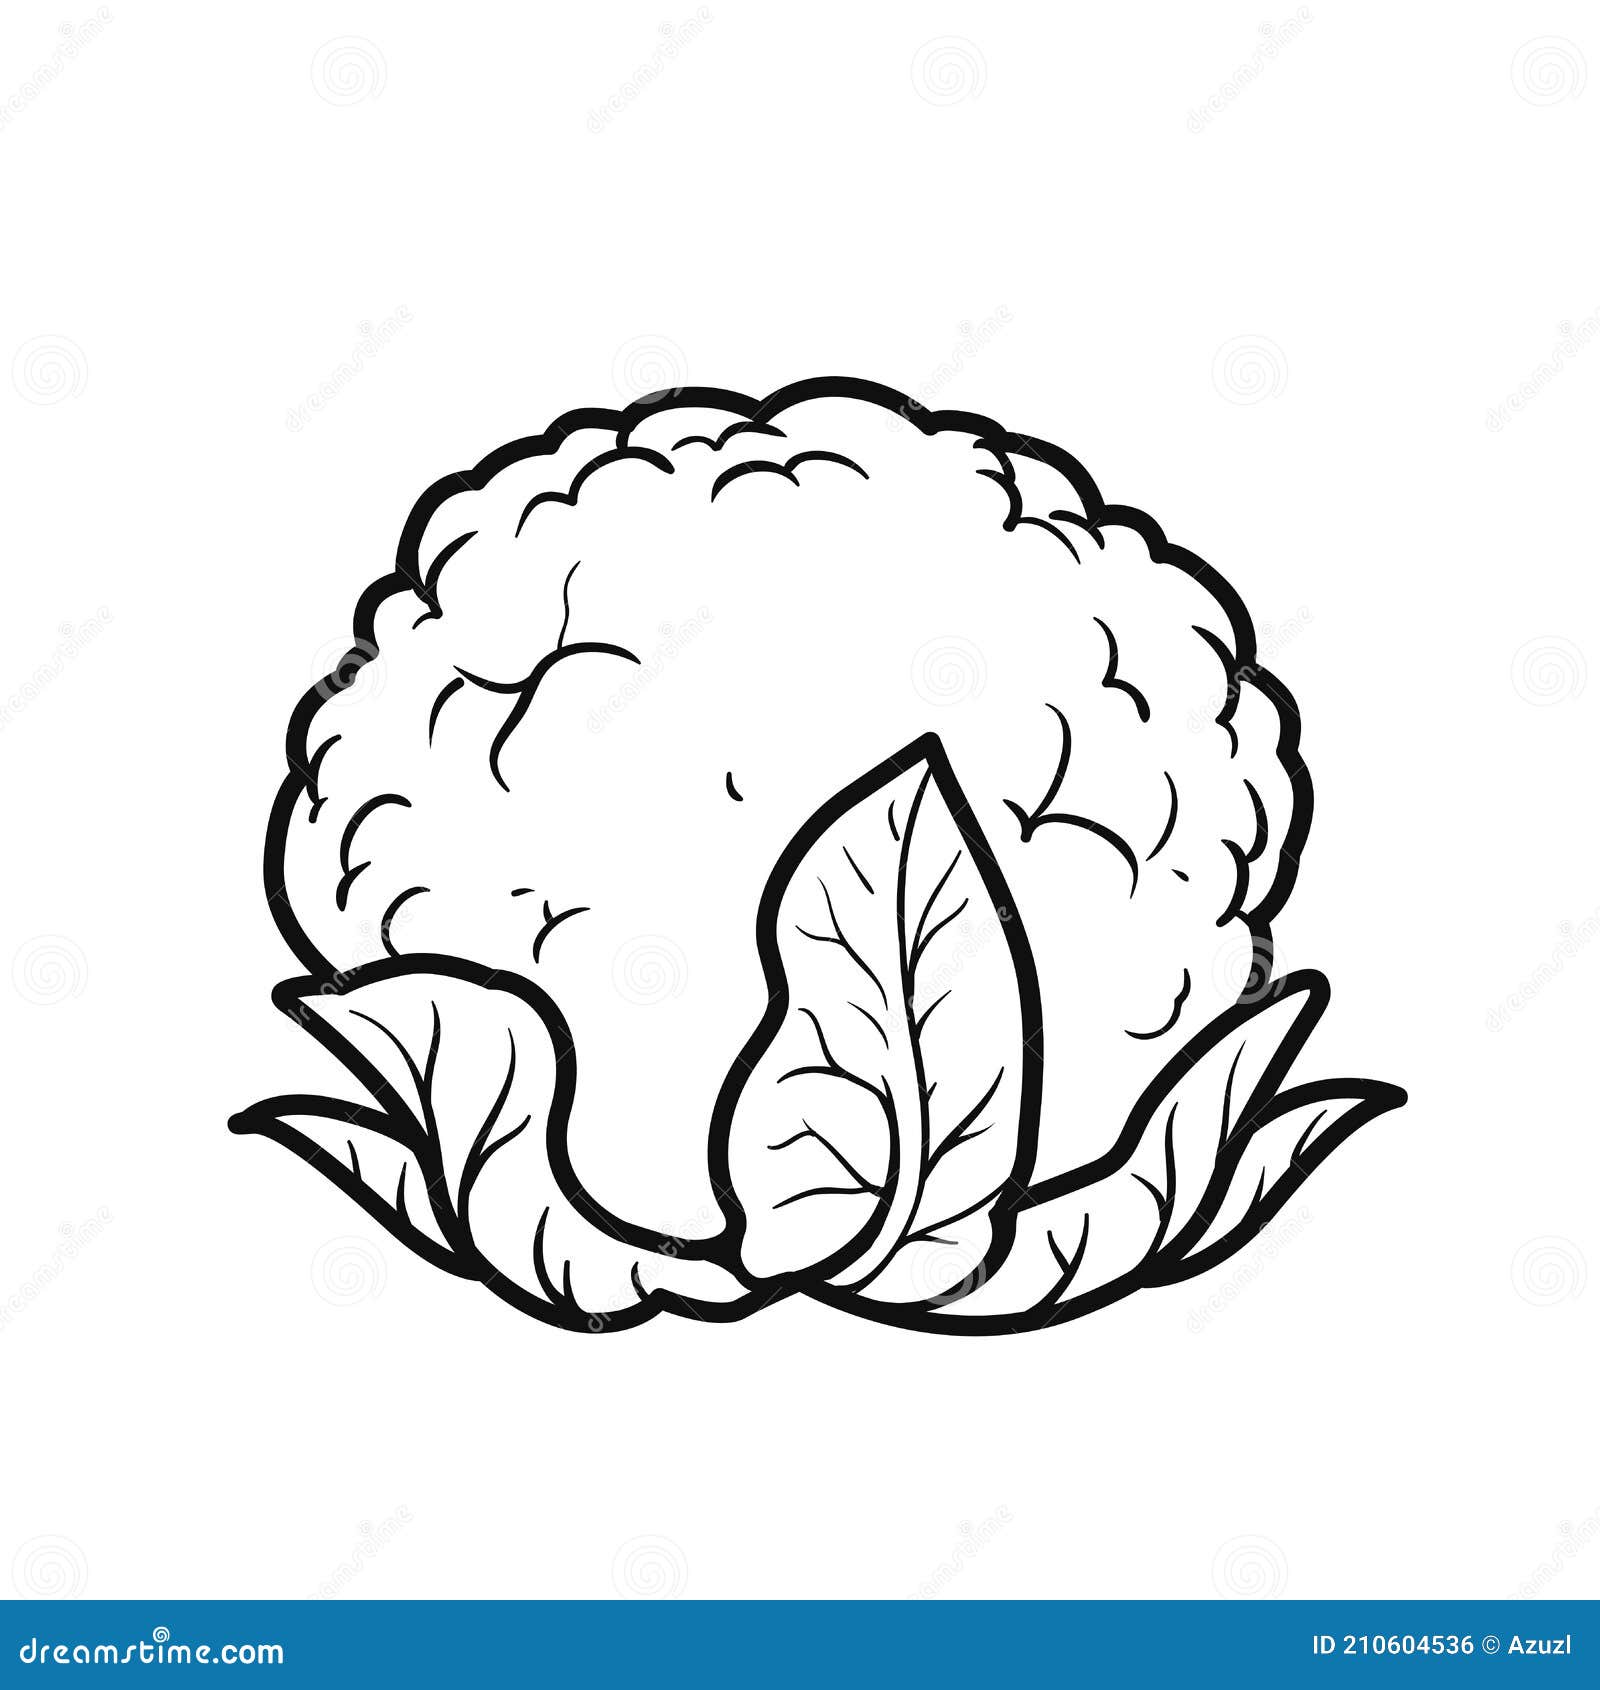 Cauliflower Linear Drawing on White Stock Vector - Illustration of black,  game: 210604536